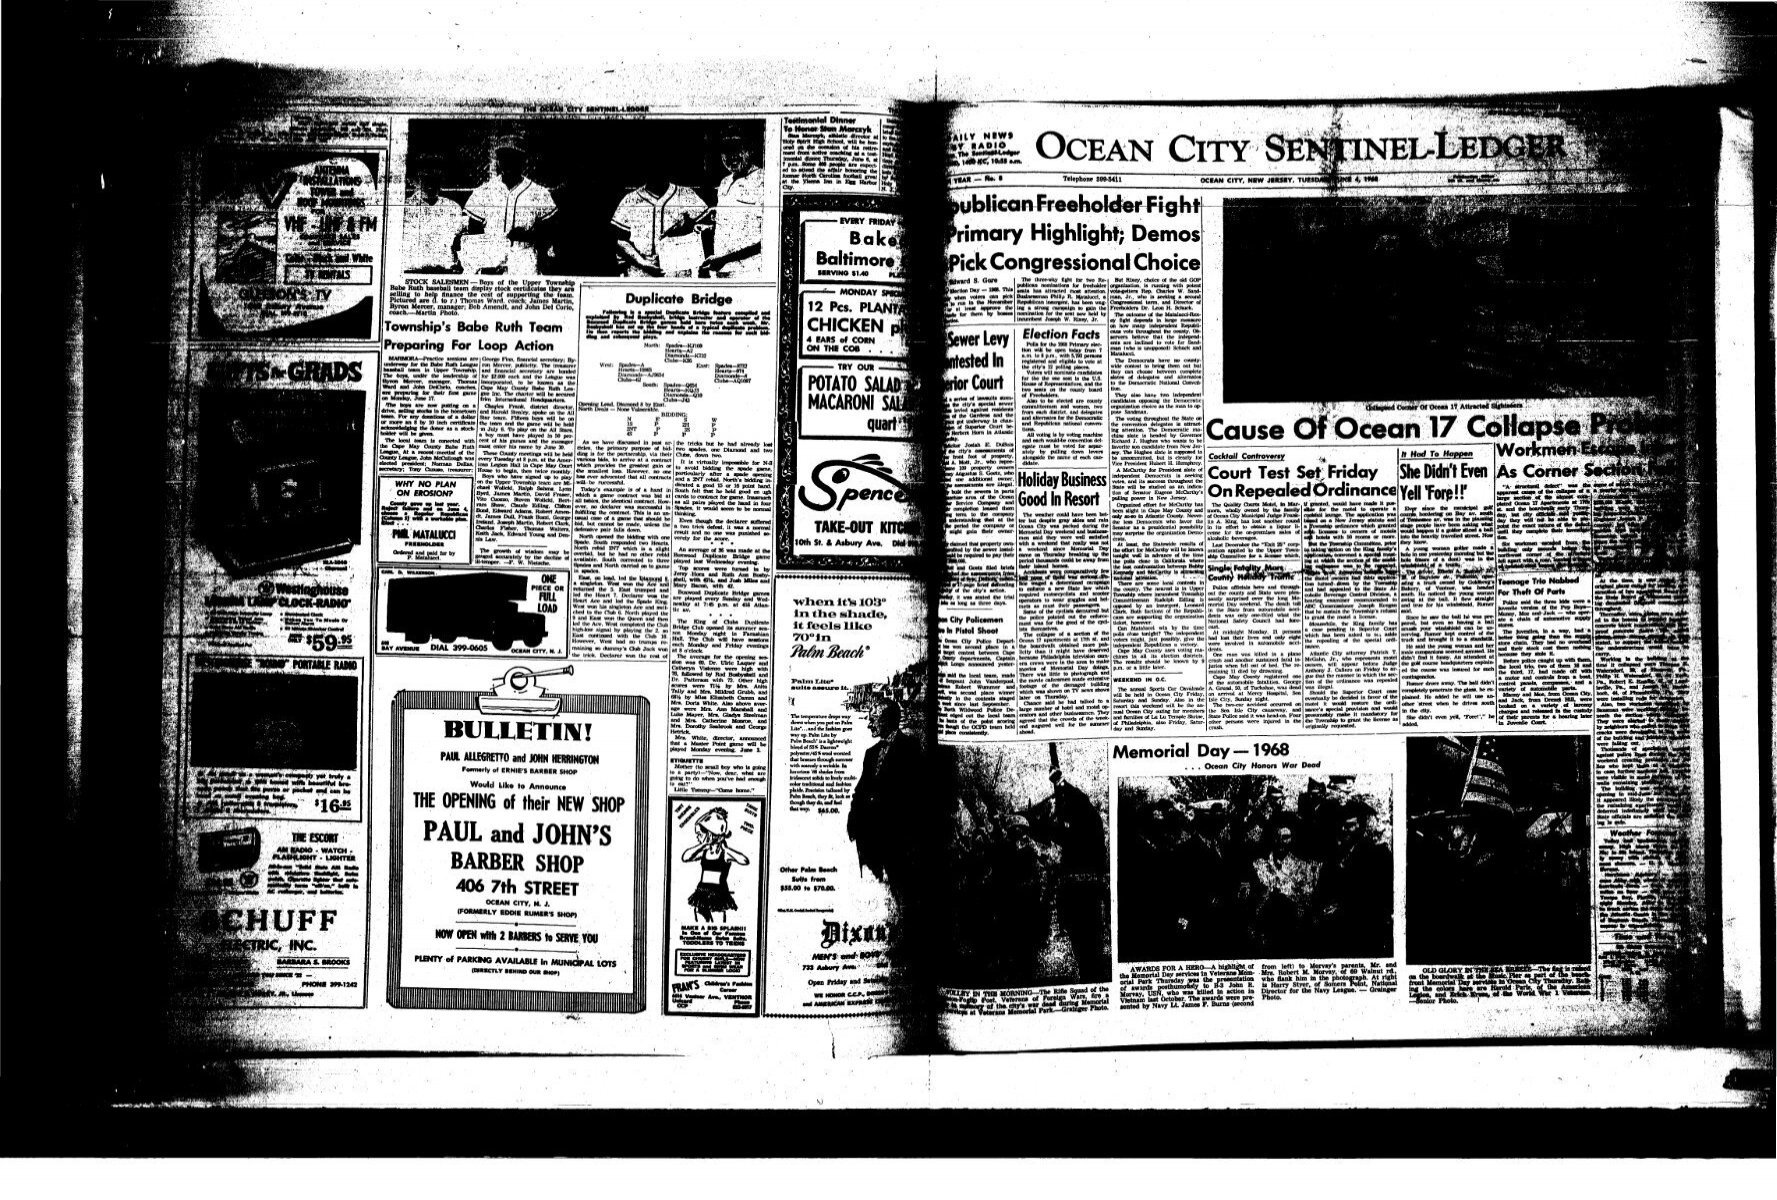 Jun 1968 On Line Newspaper Archives Of Ocean City - tay k x the race roblox id code along with 4 others bank account flex like ouu